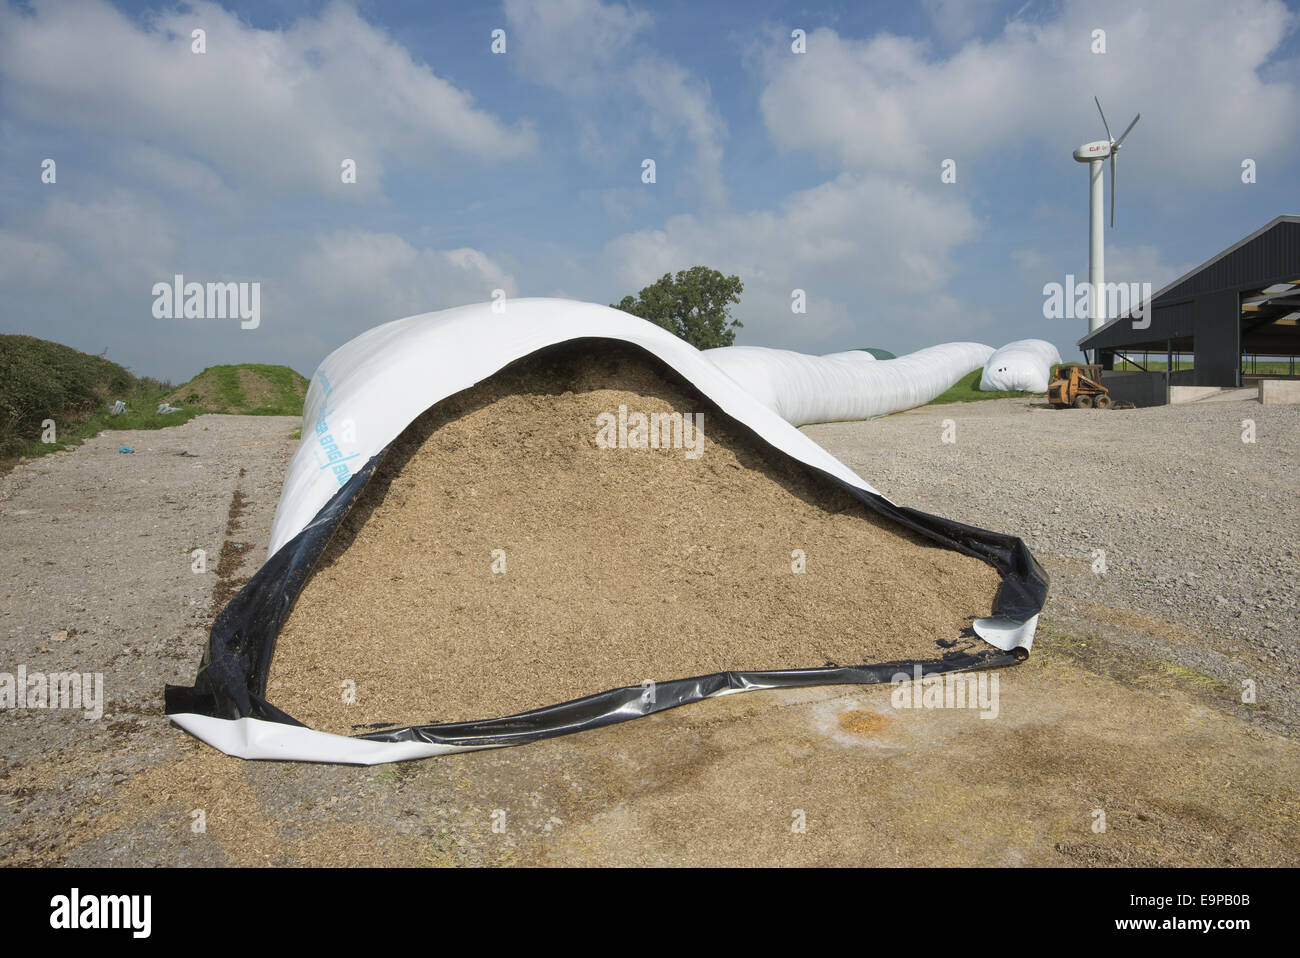 Whole-crop wheat in ag-bags on farm, with wind turbine in background, Yorkshire, England, September Stock Photo